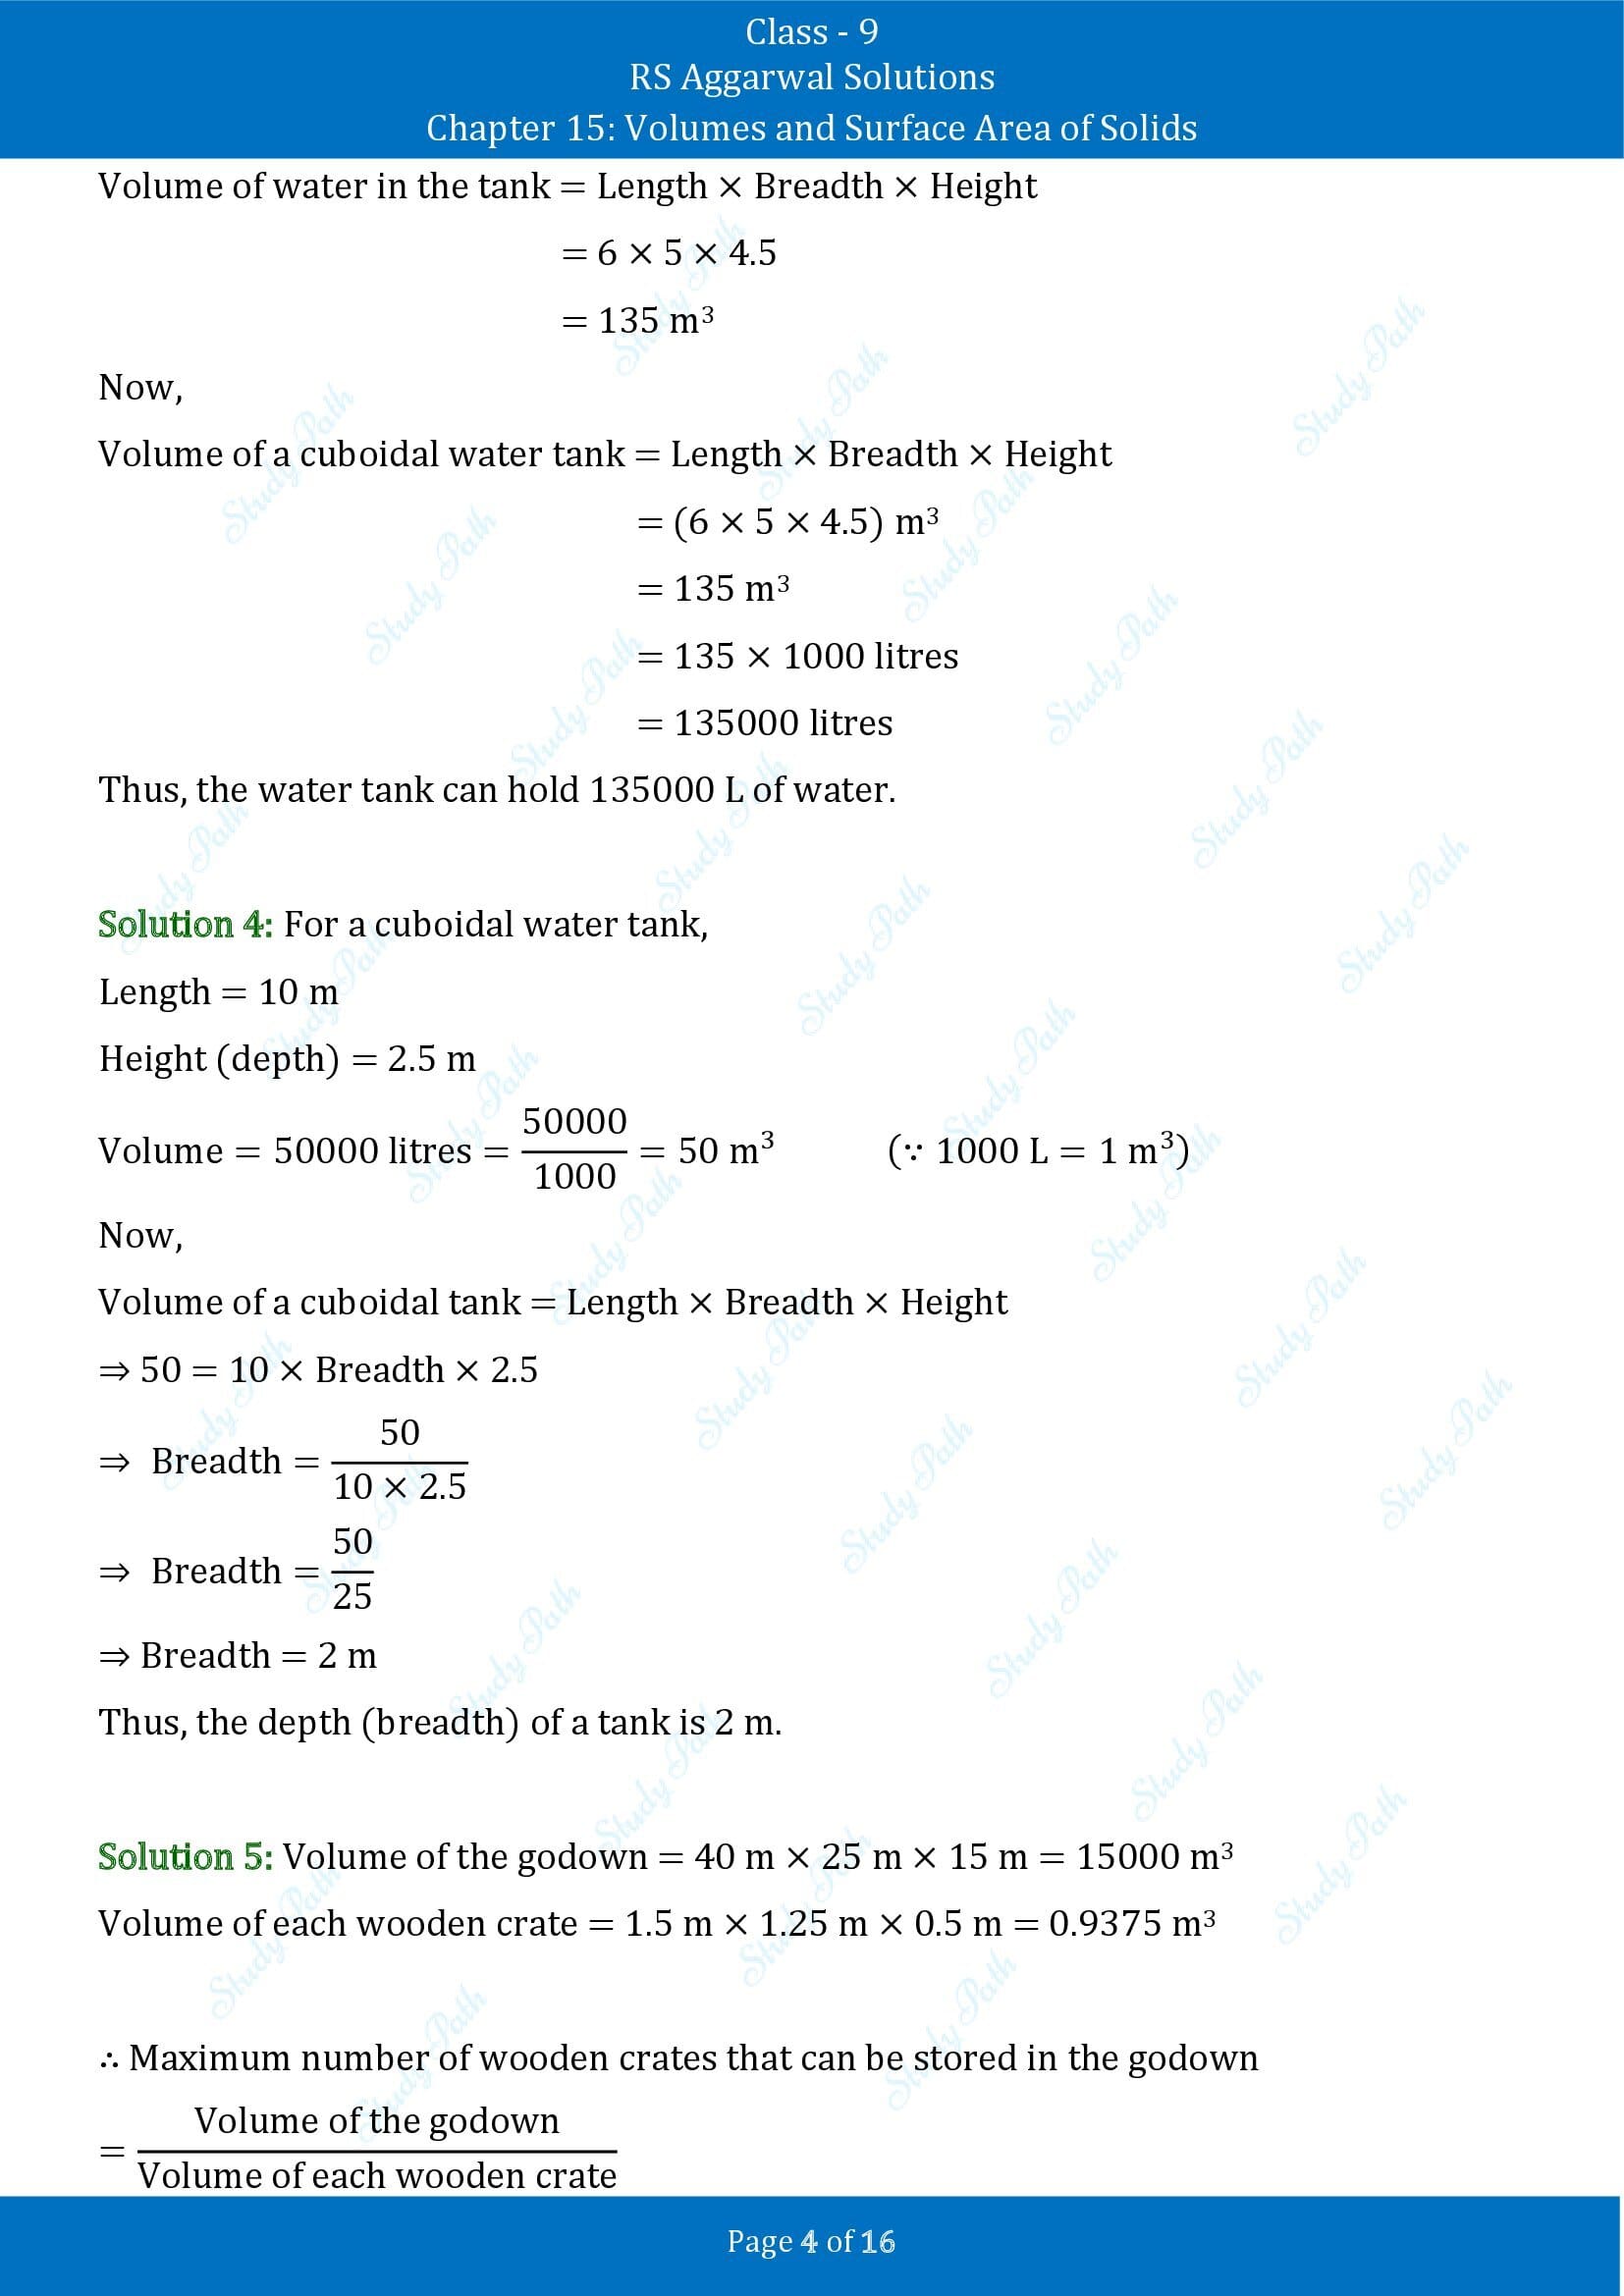 RS Aggarwal Solutions Class 9 Chapter 15 Volumes and Surface Area of Solids Exercise 15A 00004